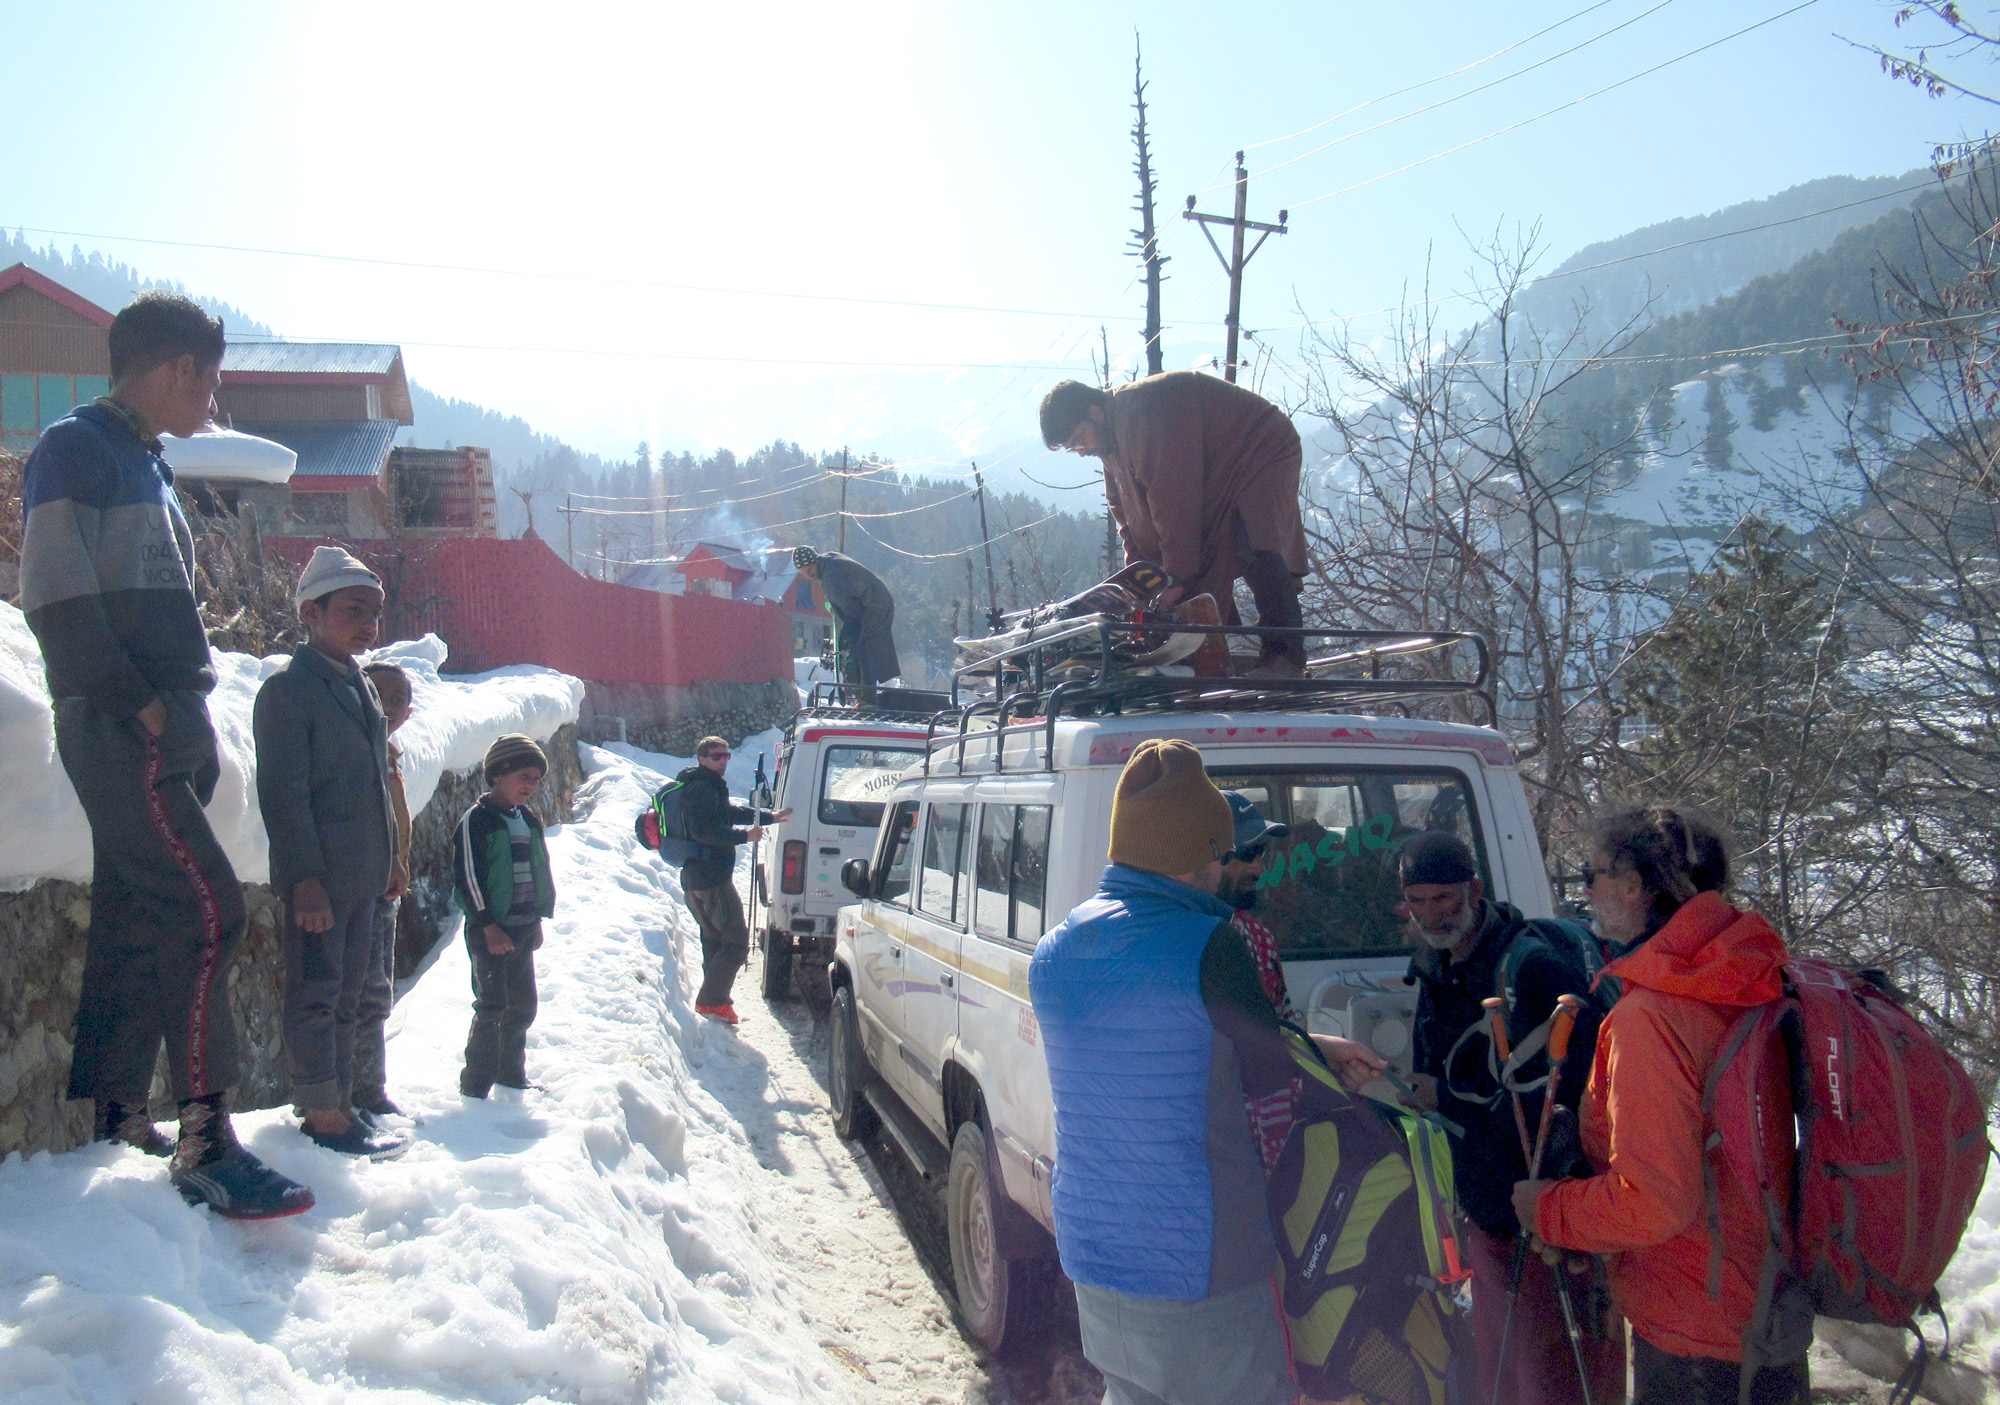 The guides organising our transport from Drang back to Gulmarg